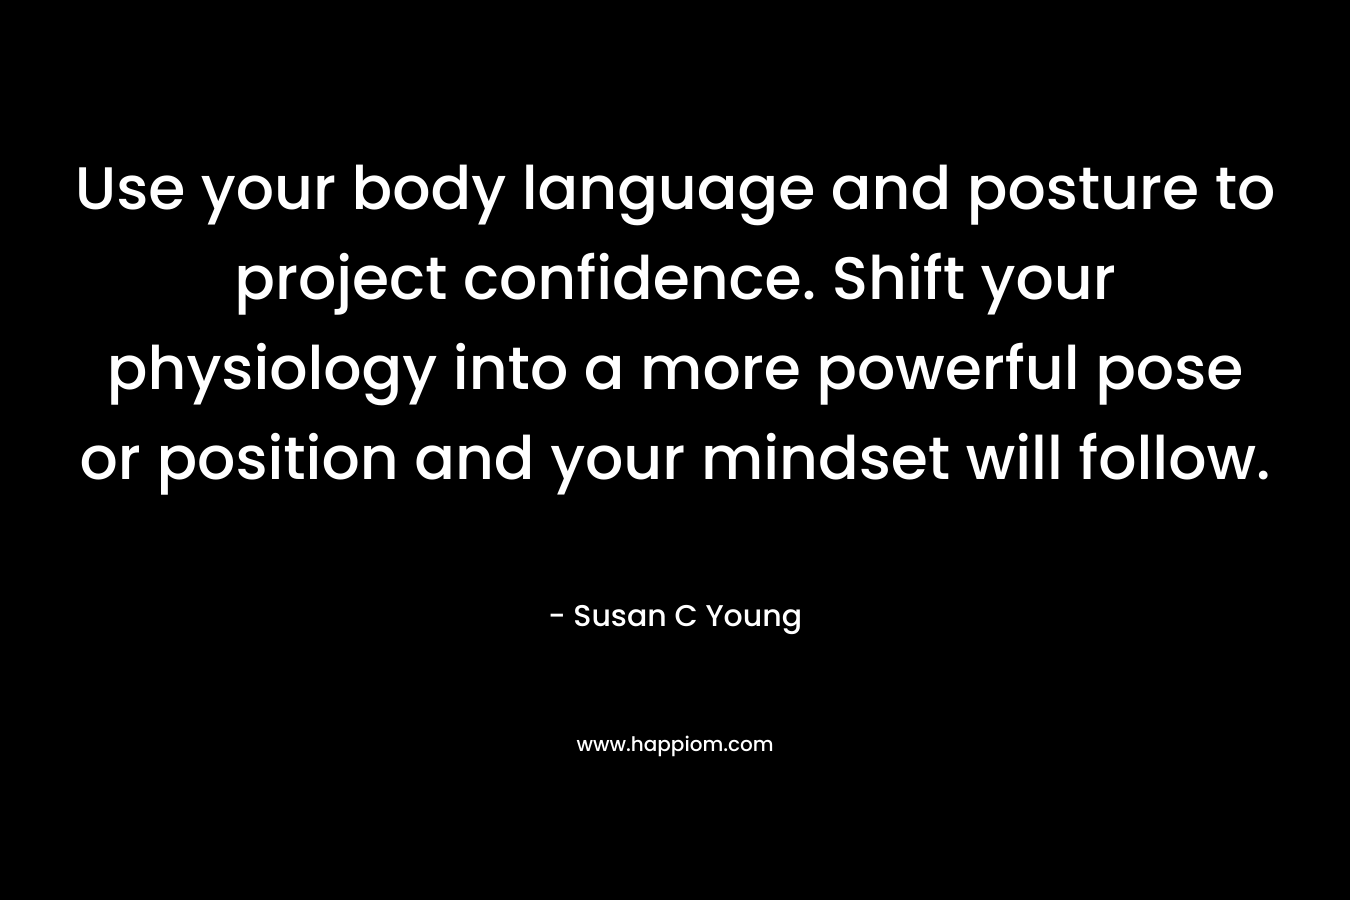 Use your body language and posture to project confidence. Shift your physiology into a more powerful pose or position and your mindset will follow. – Susan C Young